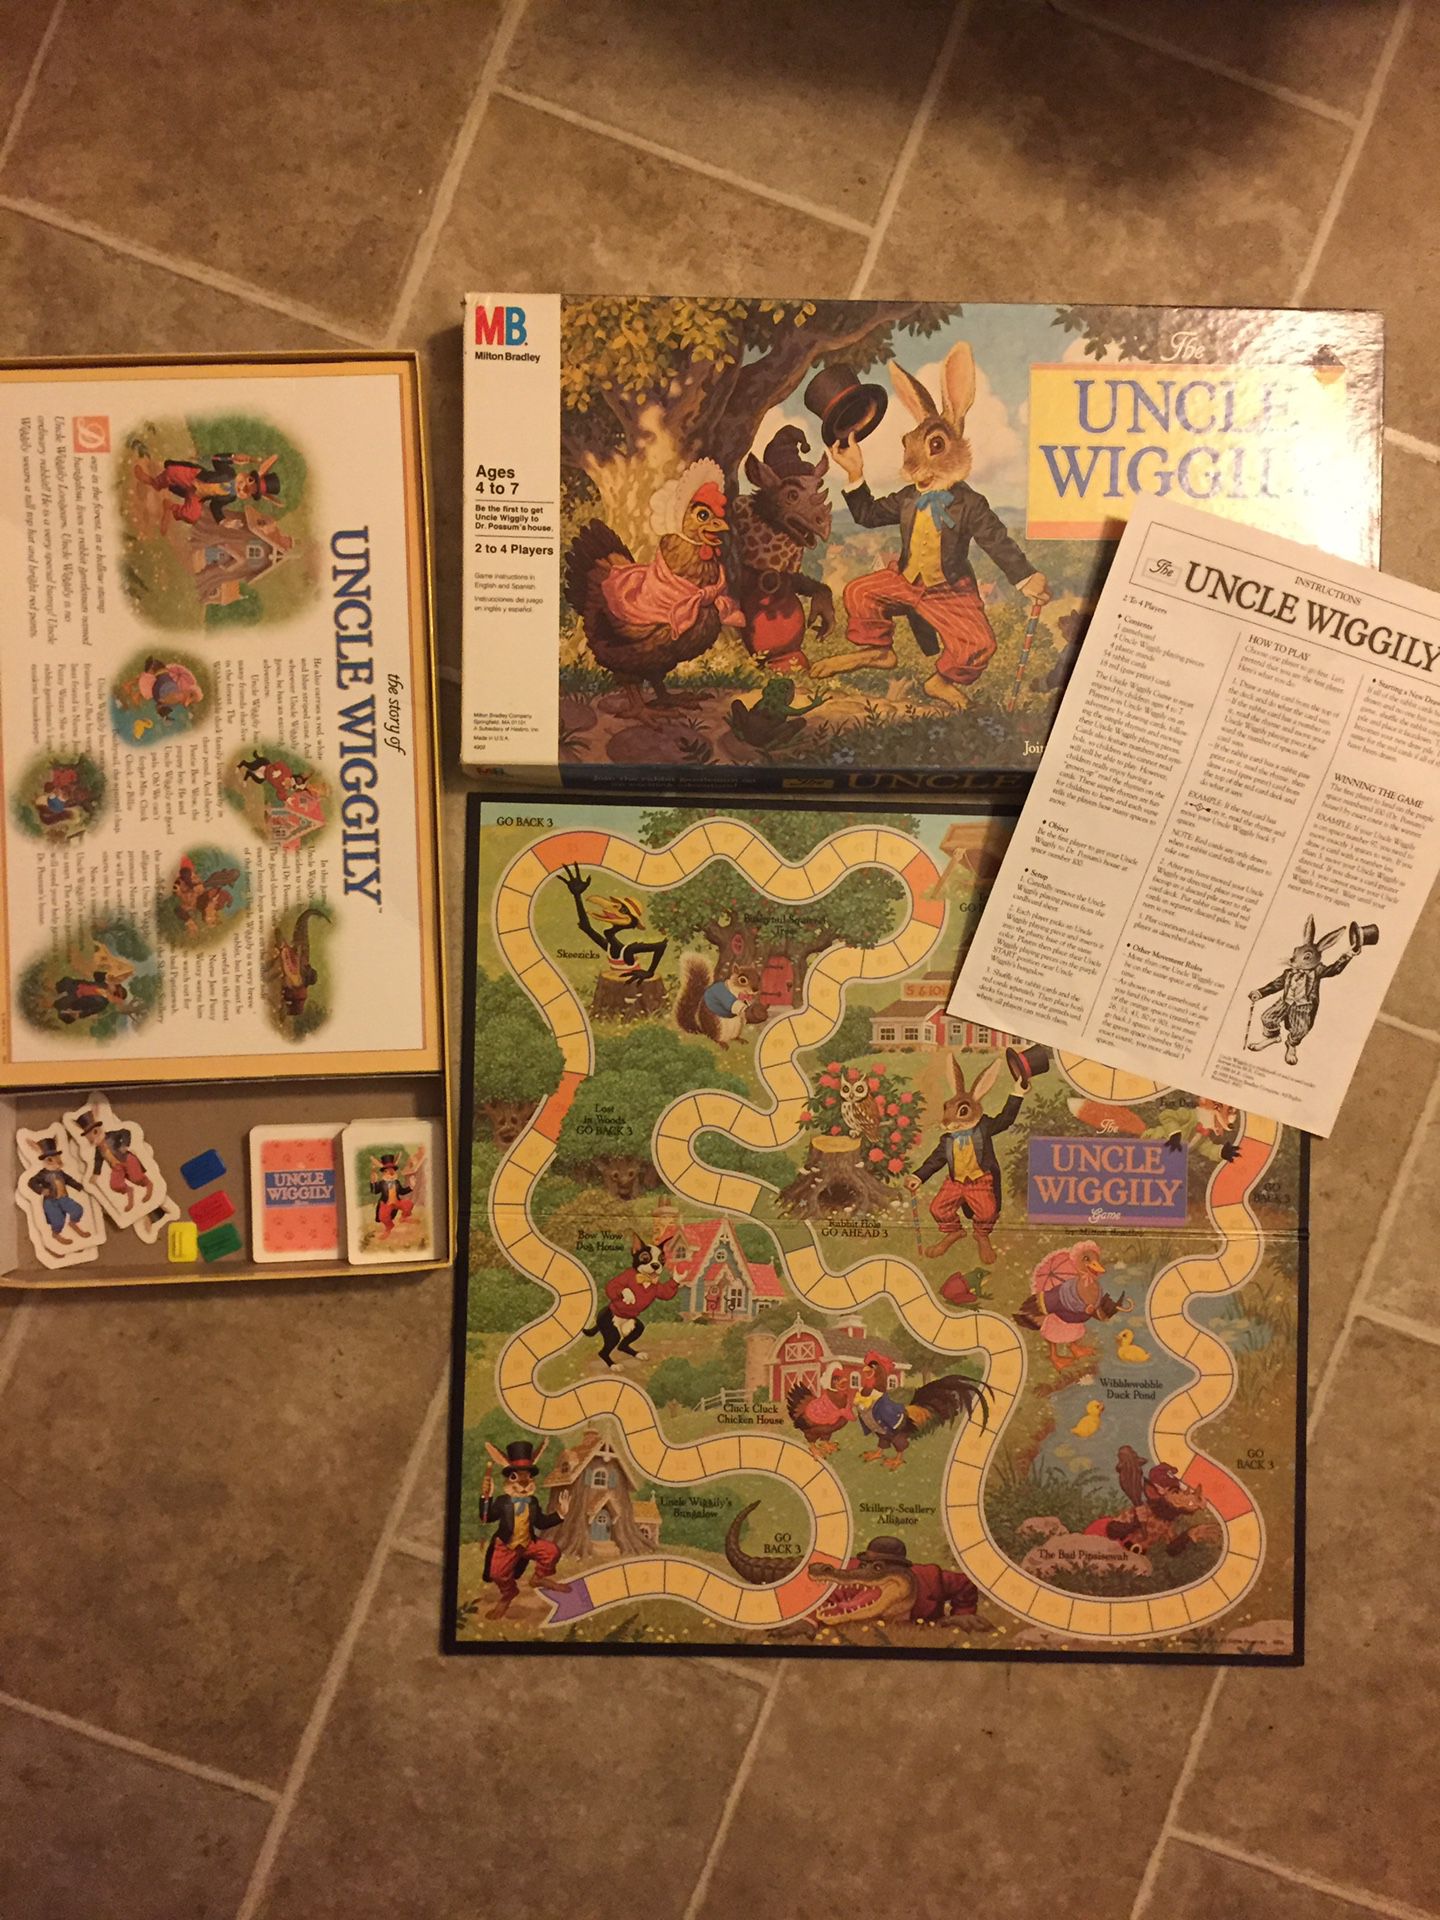 1988 The Uncle Wiggle Game